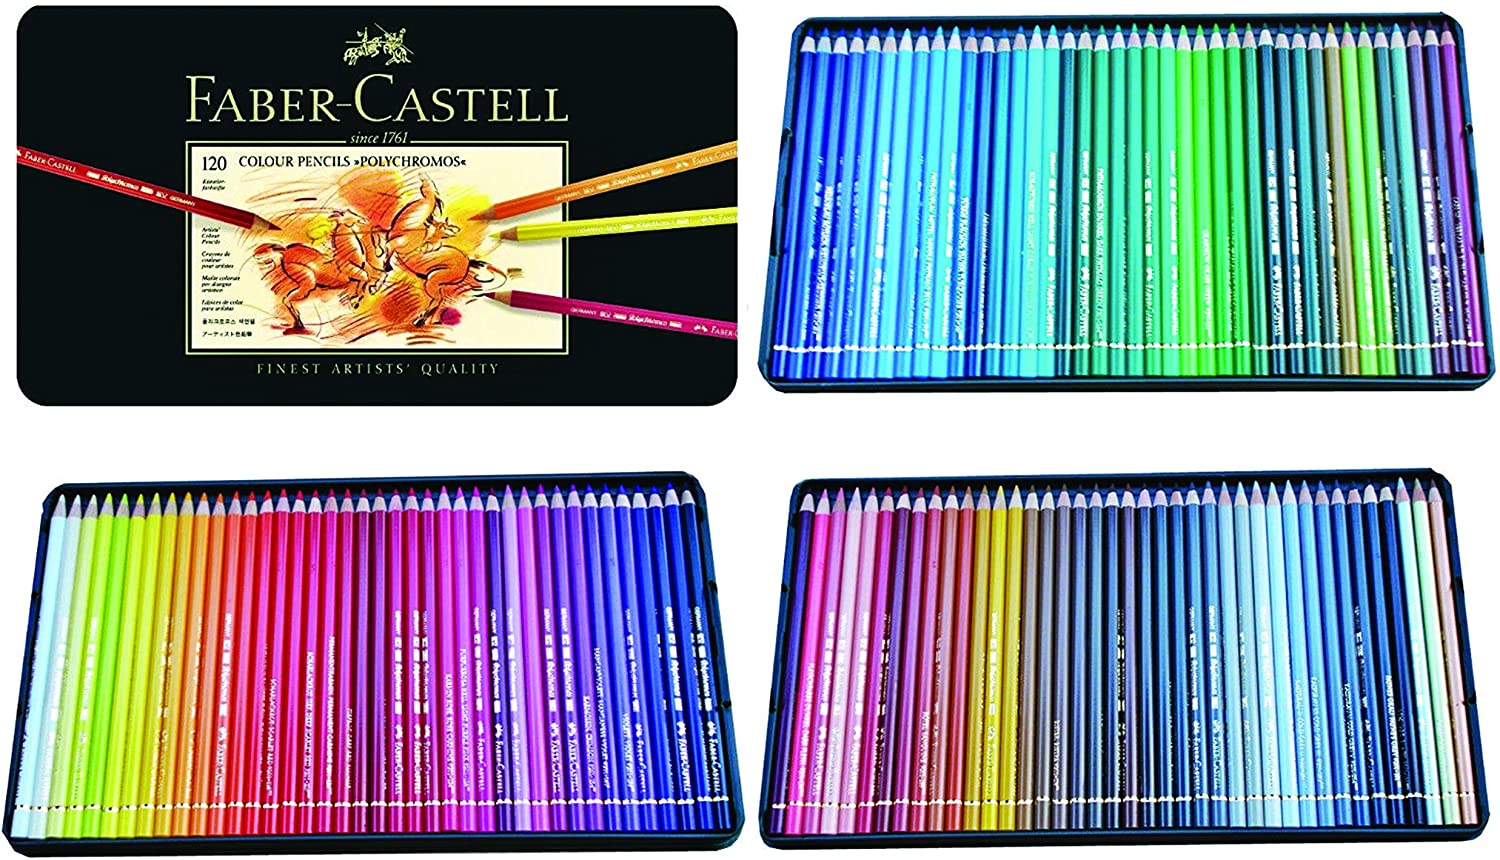 Faber-Castell Polychromos Artist Colored Pencils Set case and open photo